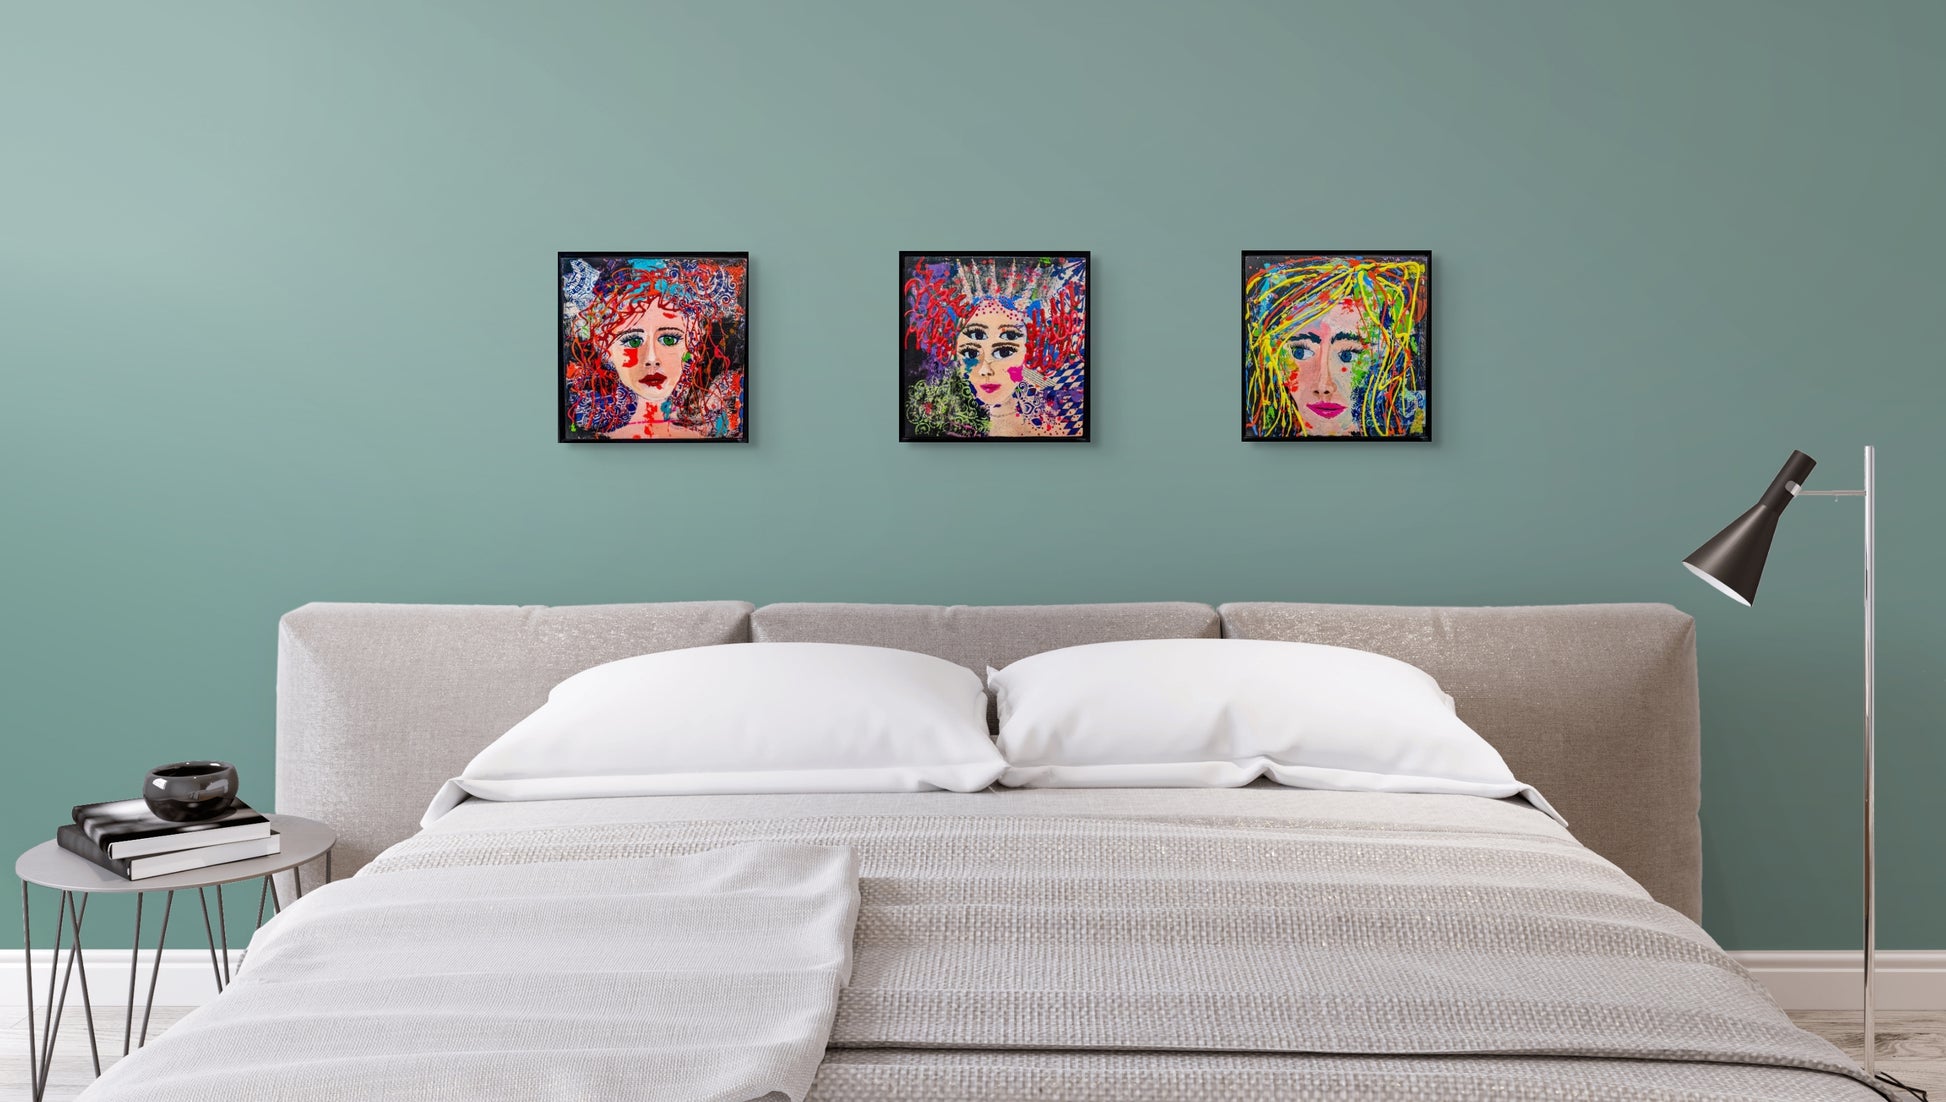 Photo shows a bed, lamp and bedside table with three Whimsy Girls above, Wistful, Double Vision and Electric Daisy